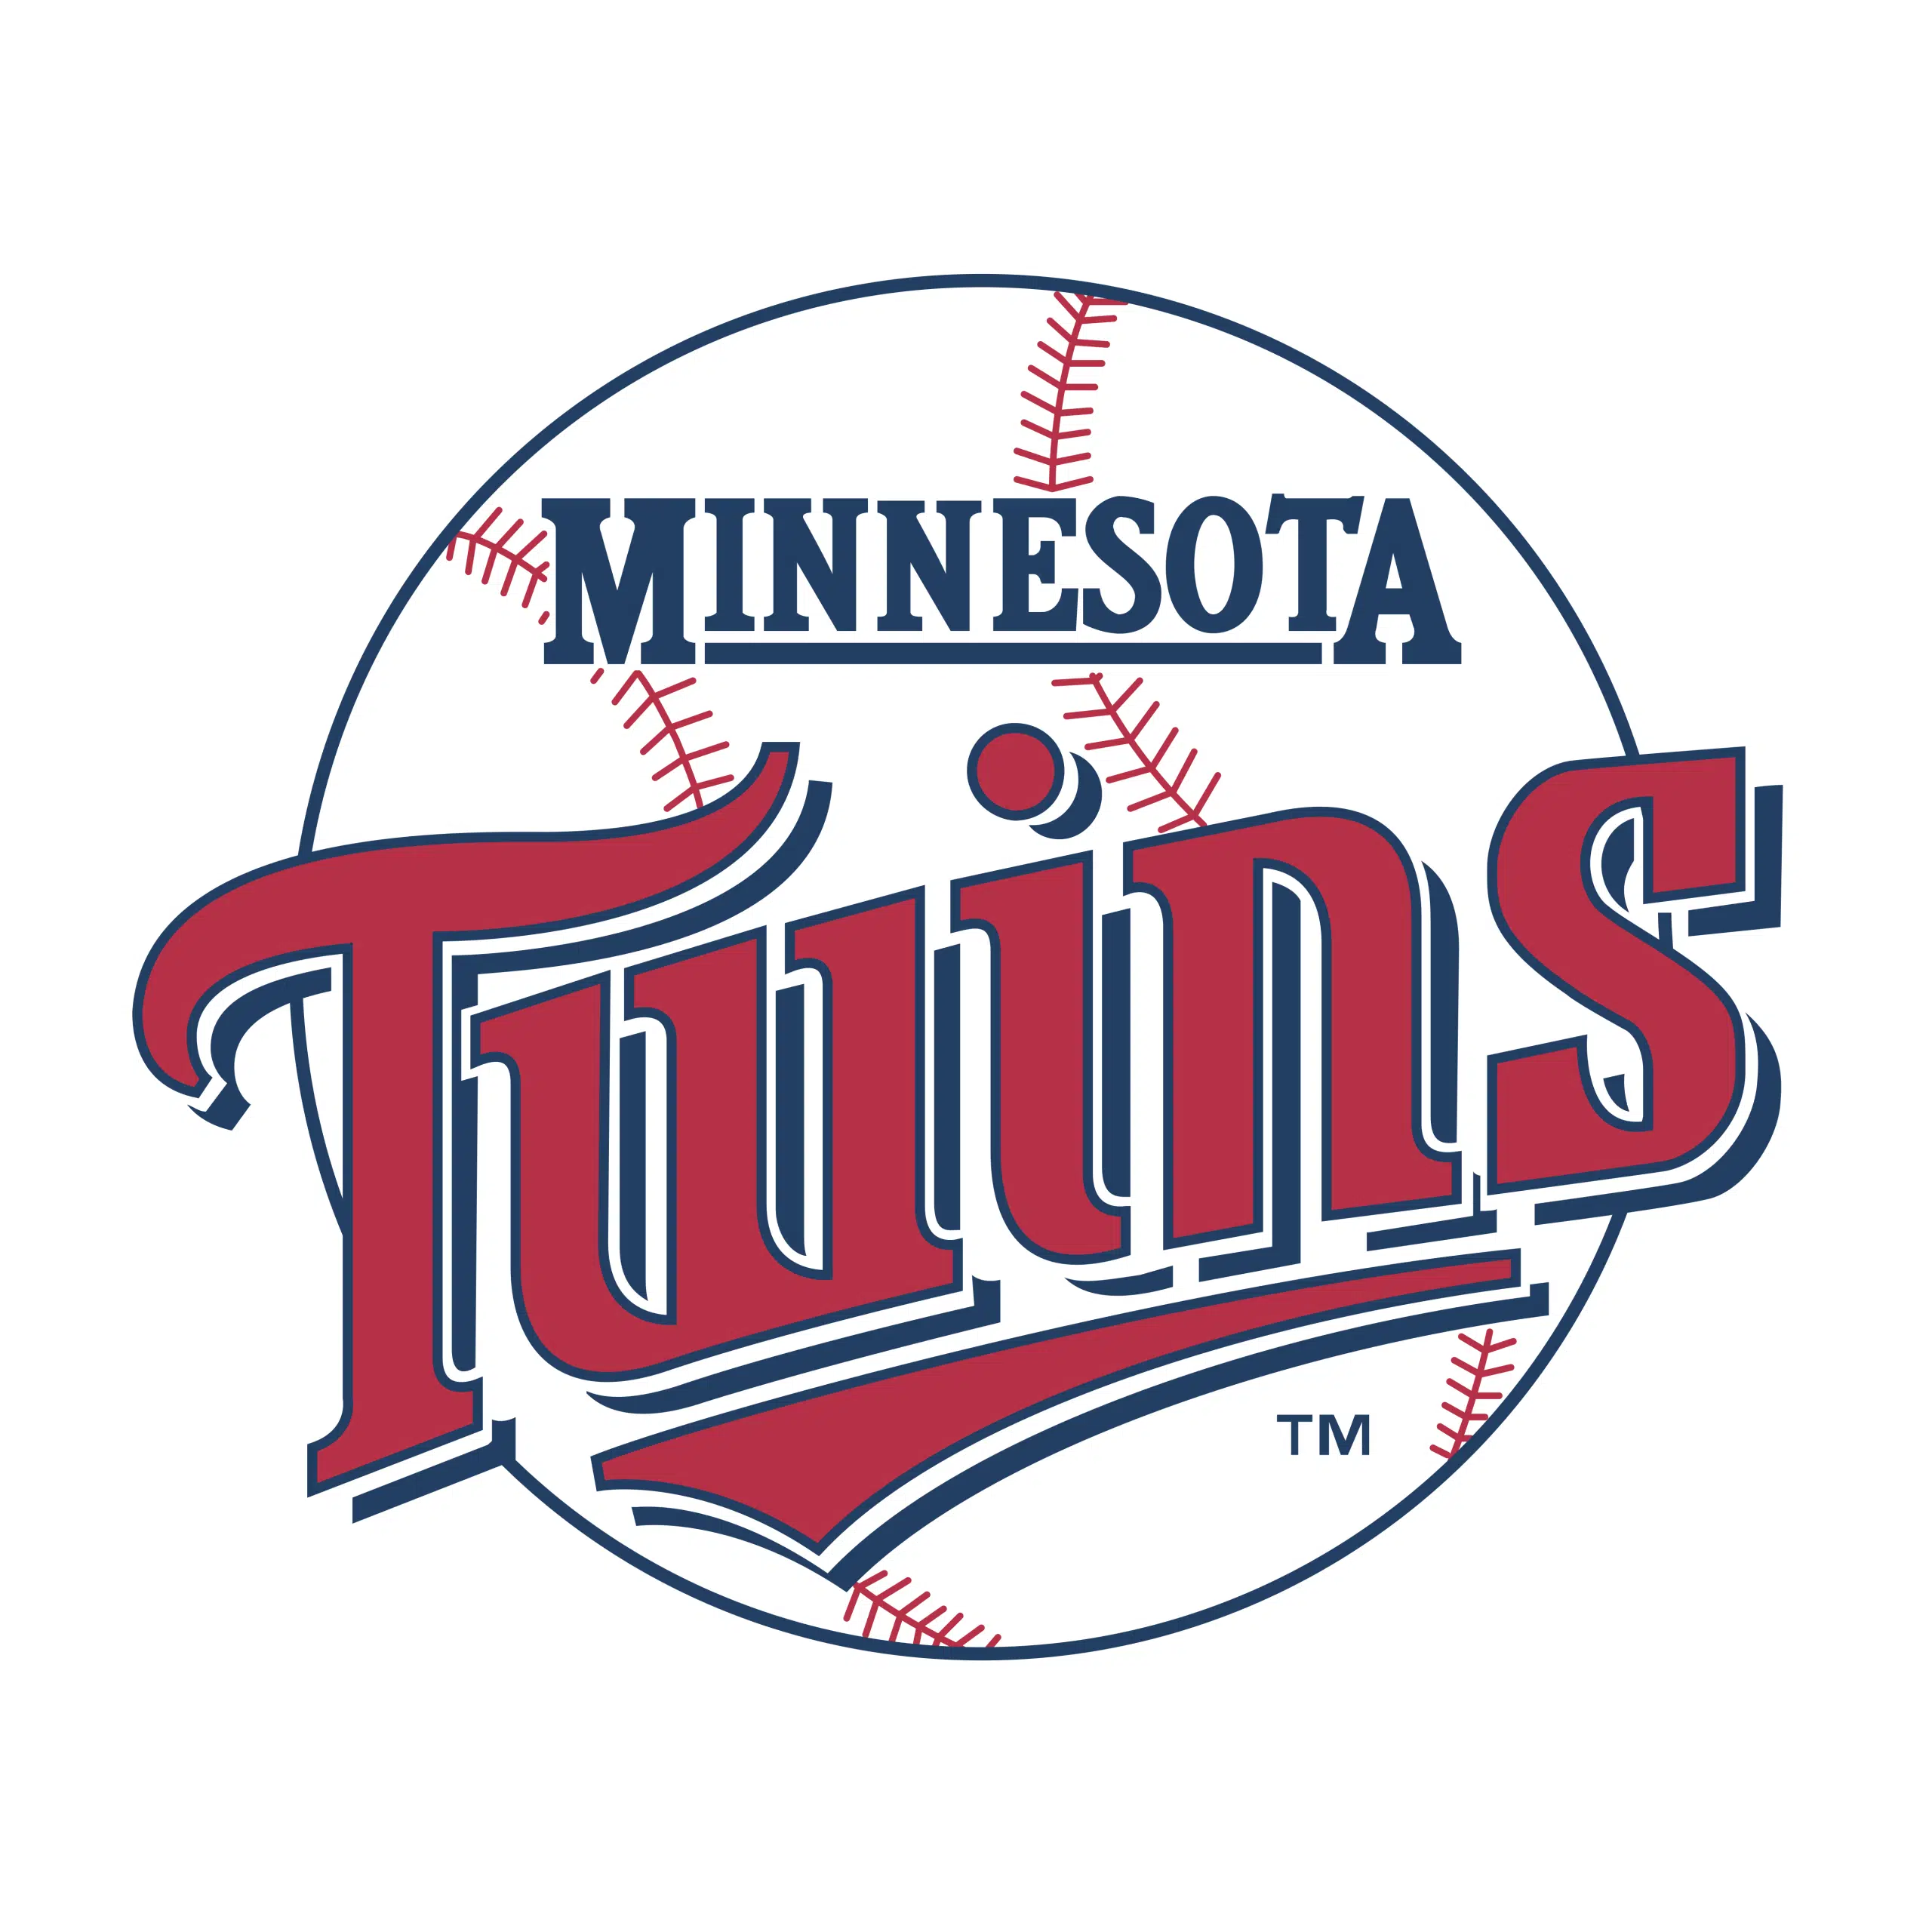 Minnesota Twins Winter Caravan is back on the road and is coming to